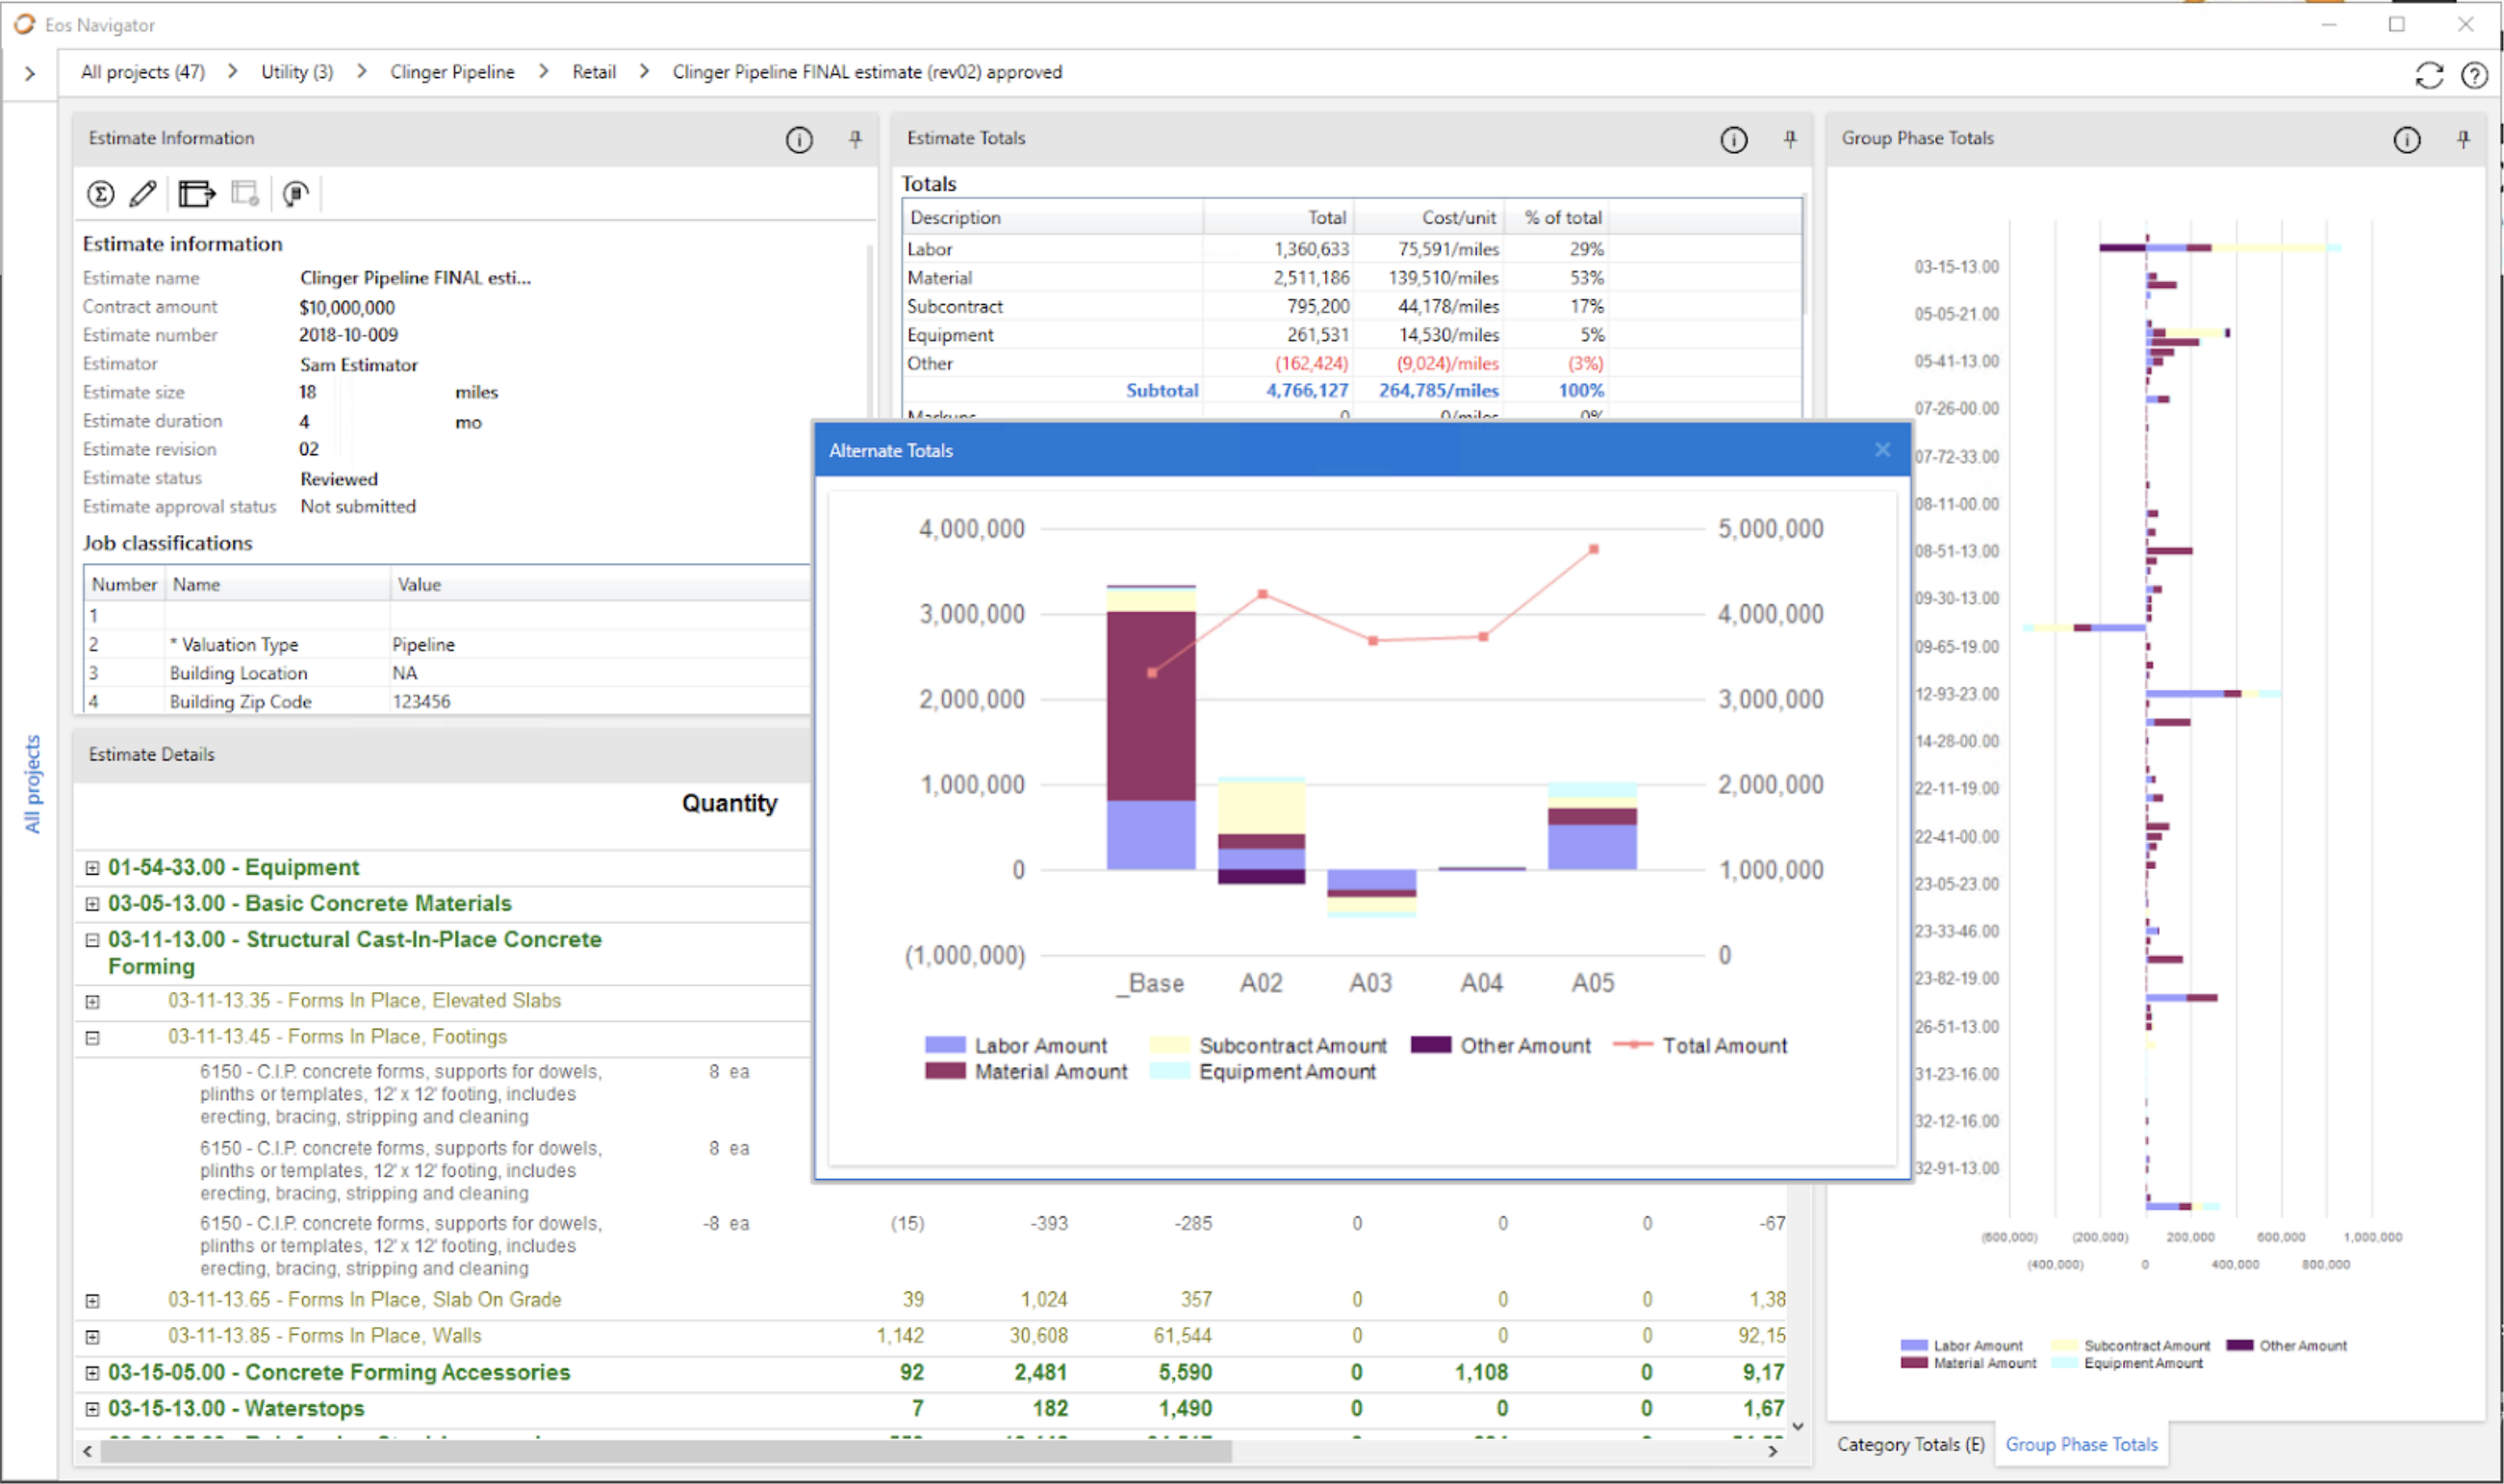 Create reports, embed dashboard infographics, manage your portfolio, compare estimates side-by-side in charts and tables, roll up the estimate data for a project, generate detail estimate reports even while the estimate is in use, export report data to Mi